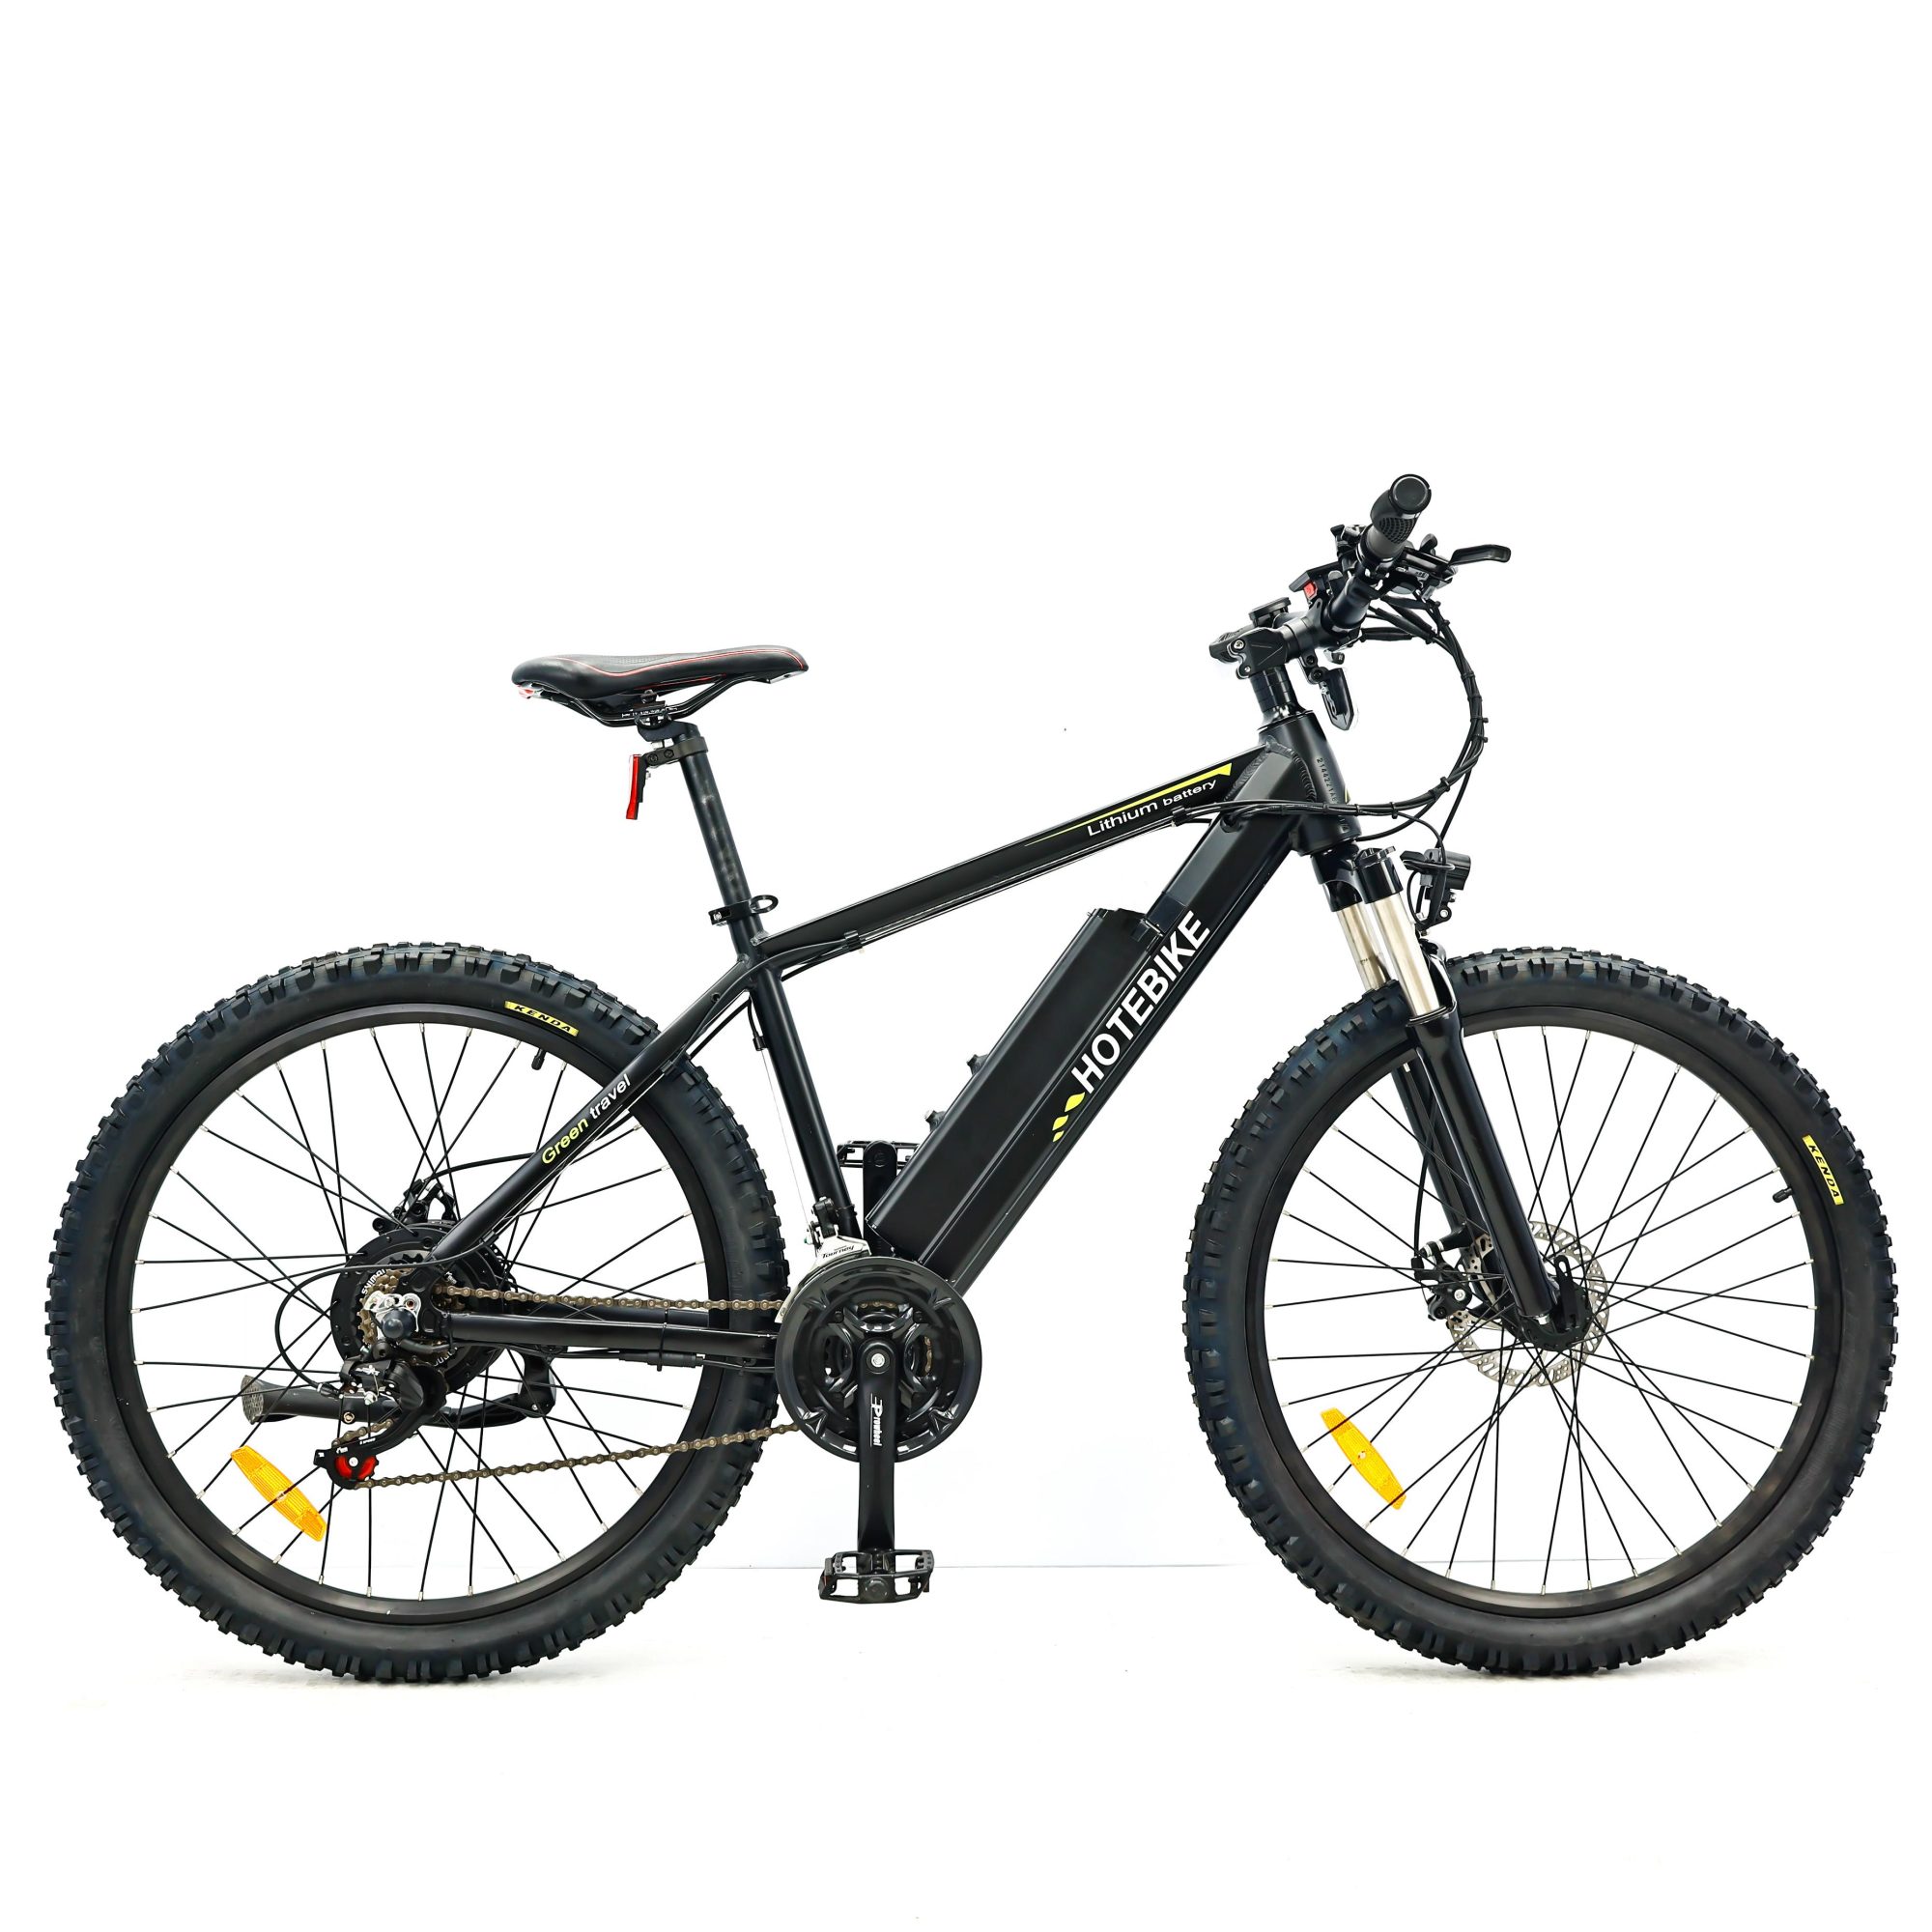 New Arrial Electric Mountain Bike 26 inch